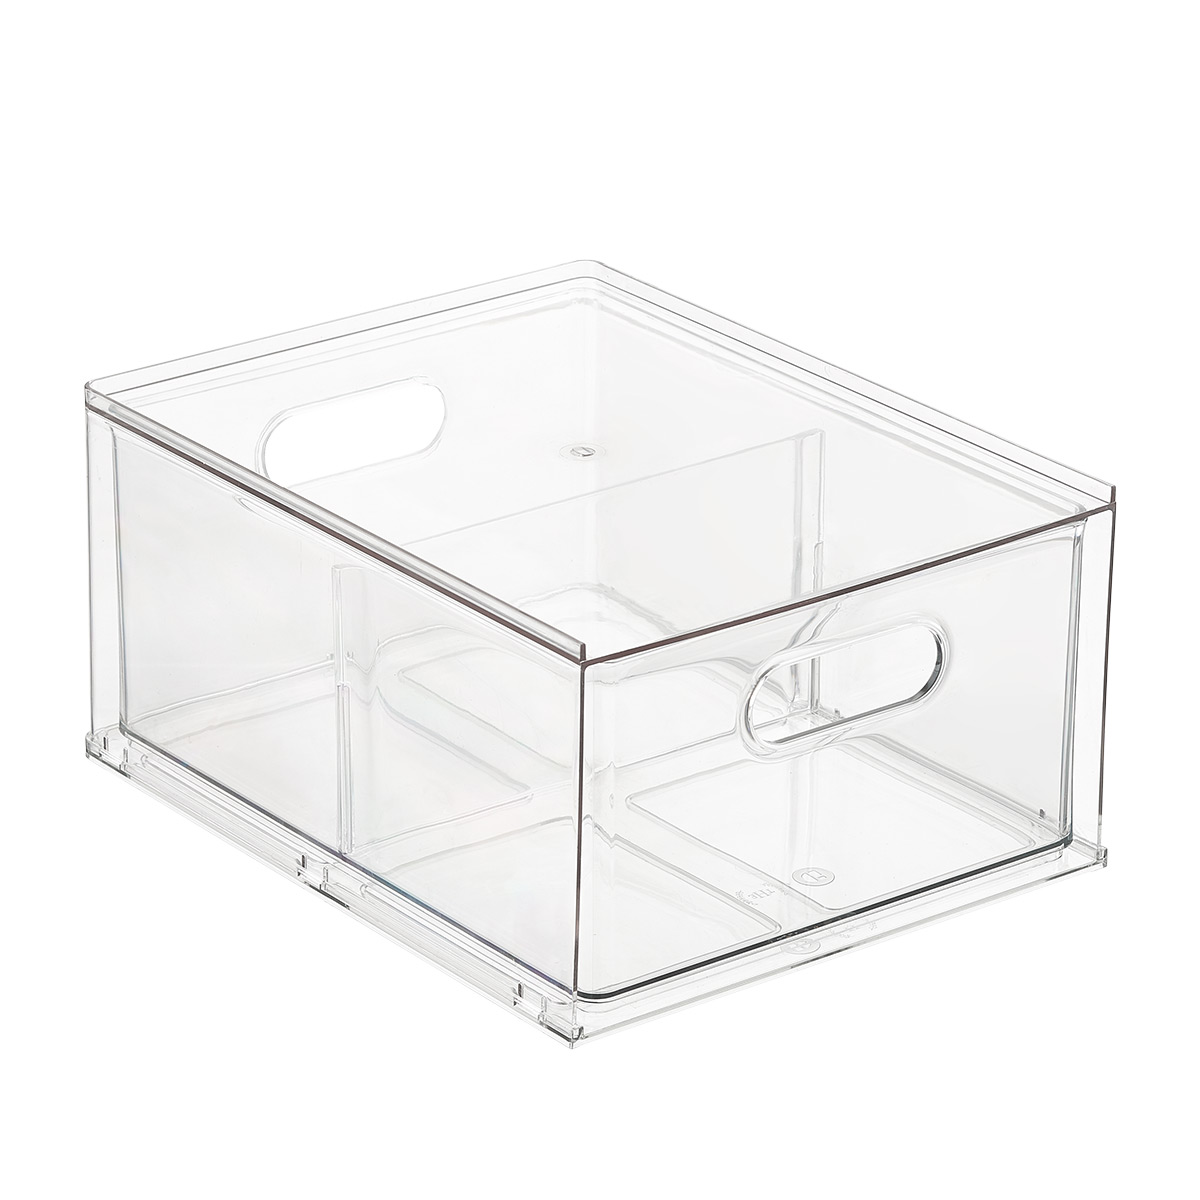 https://images.containerstore.com/catalogimages/364014/10077088-T.H.E.-large-drawer-v2.jpg